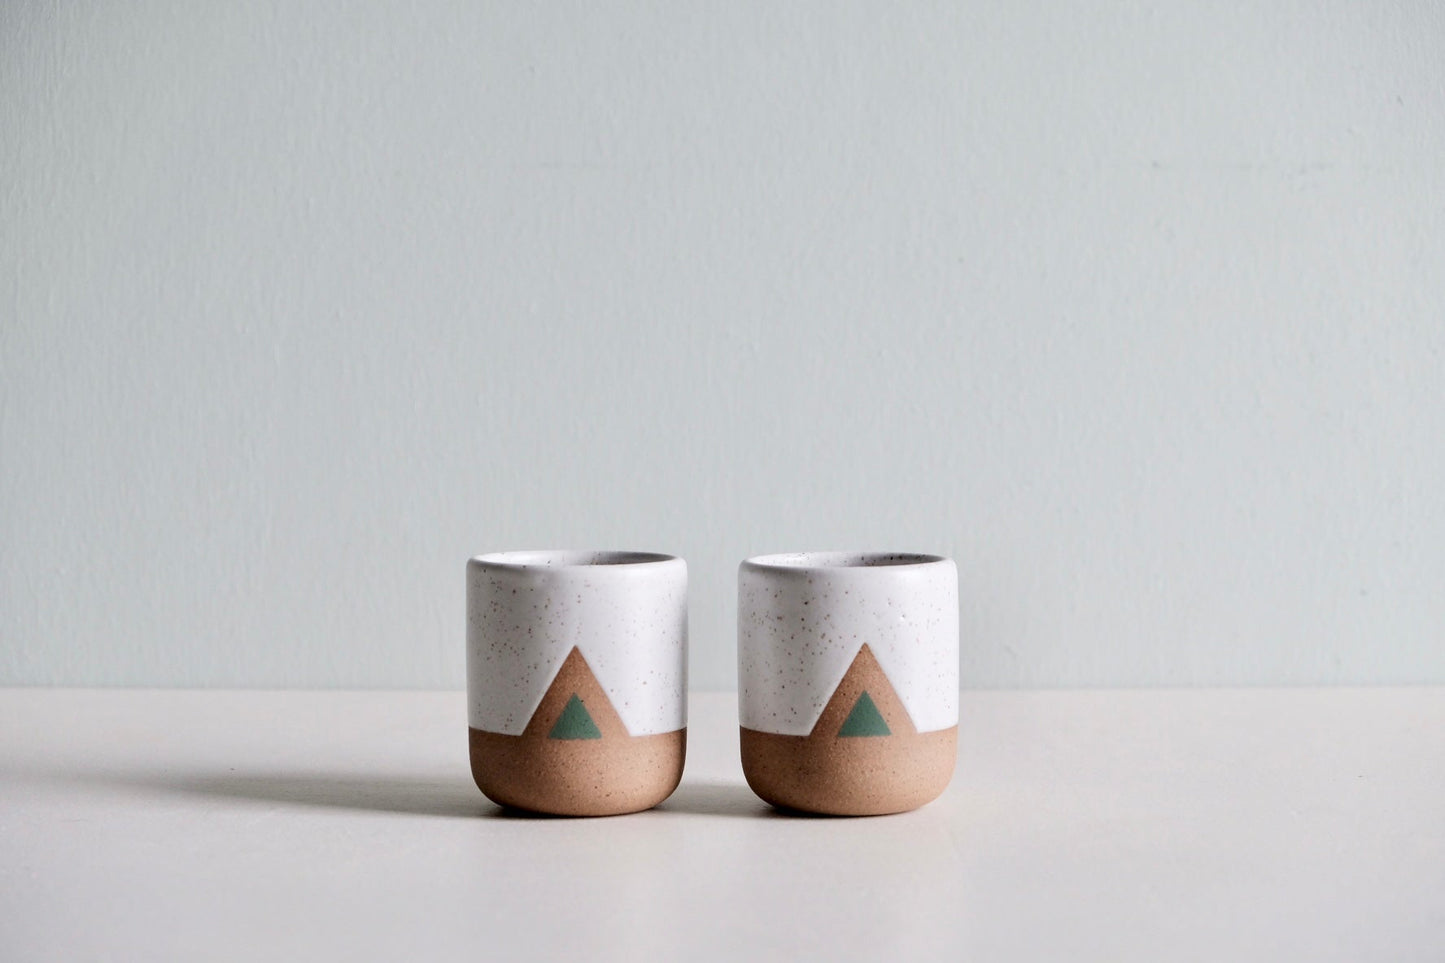 A handmade ceramic cup with a simple green triangular design.